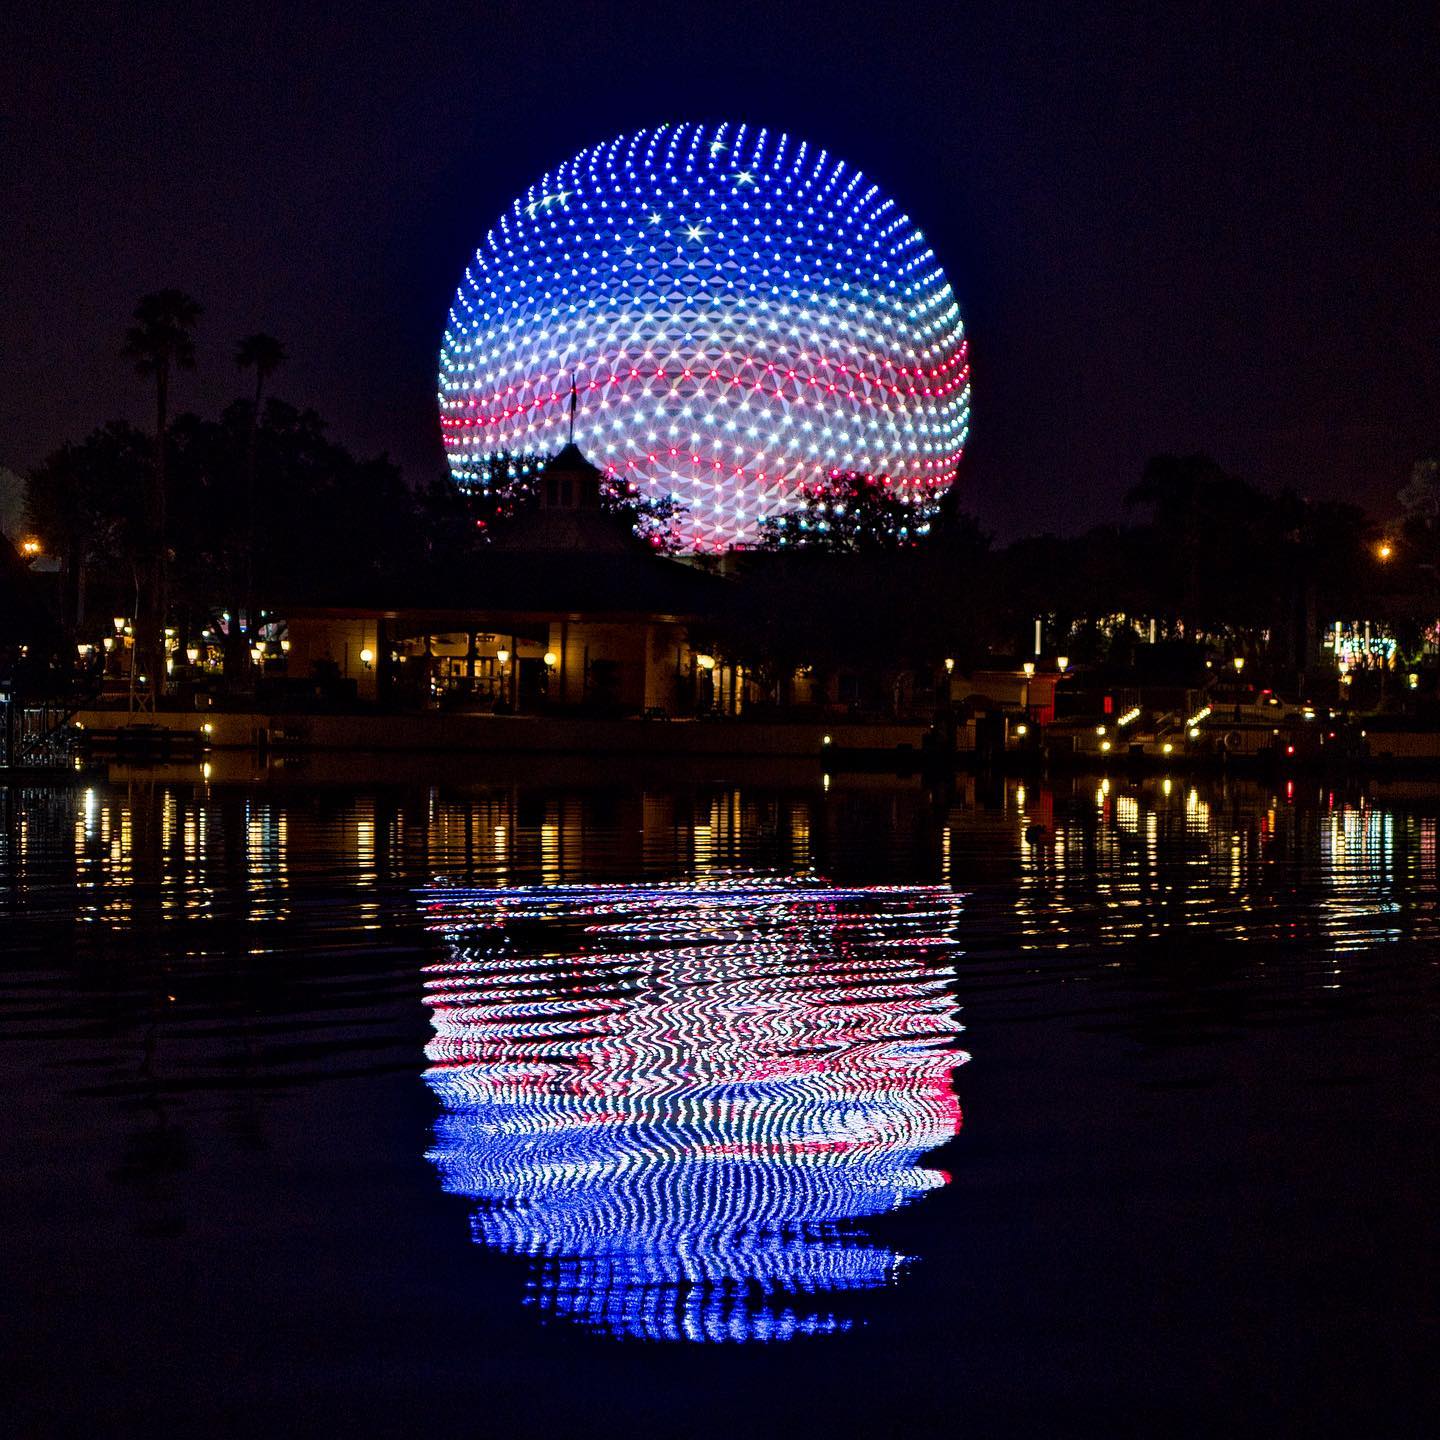 EPCOT's Spaceship Earth debuts new Fourth of July lighting design